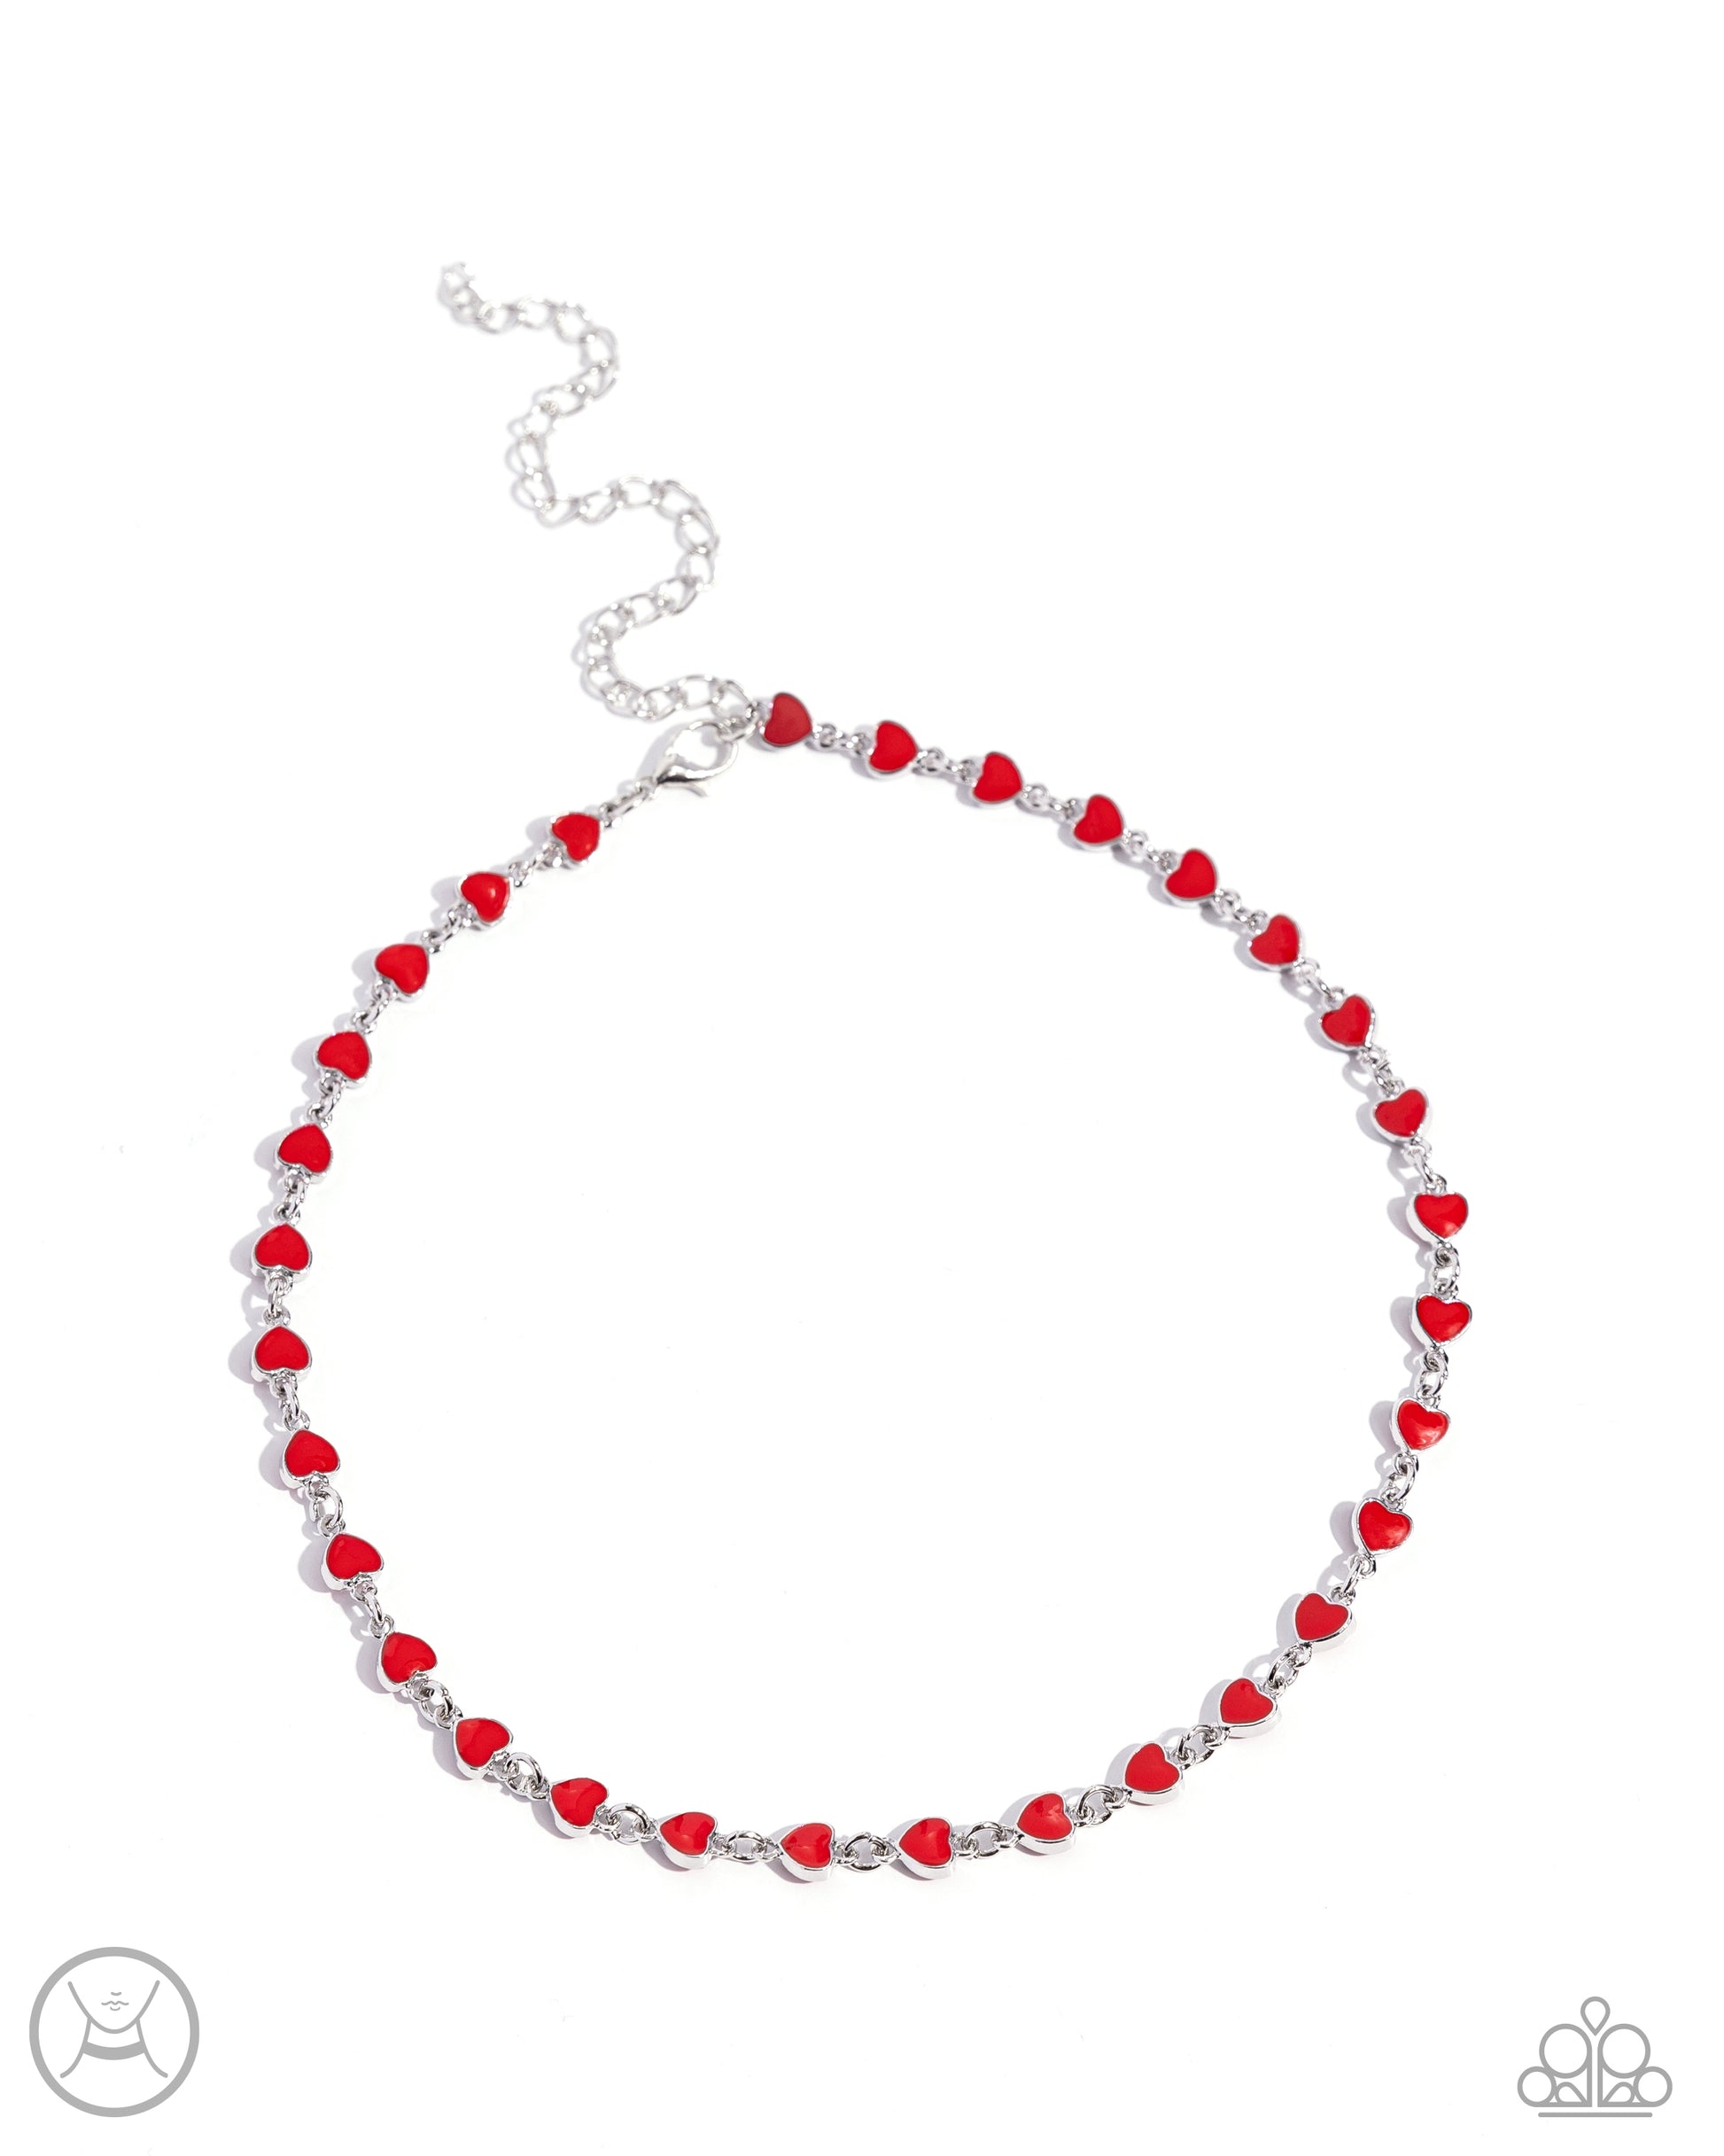 <p>Red-painted silver hearts interconnect around the collar for a simply sentimental look. Features an adjustable clasp closure.</p> <p><i>Sold as one individual choker necklace. Includes one pair of matching earrings. </i></p> &nbsp;<img src="https://d9b54x484lq62.cloudfront.net/paparazzi/shopping/images/517_chokericon_1.jpg" alt="Choker" align="middle" height="50" width="50">